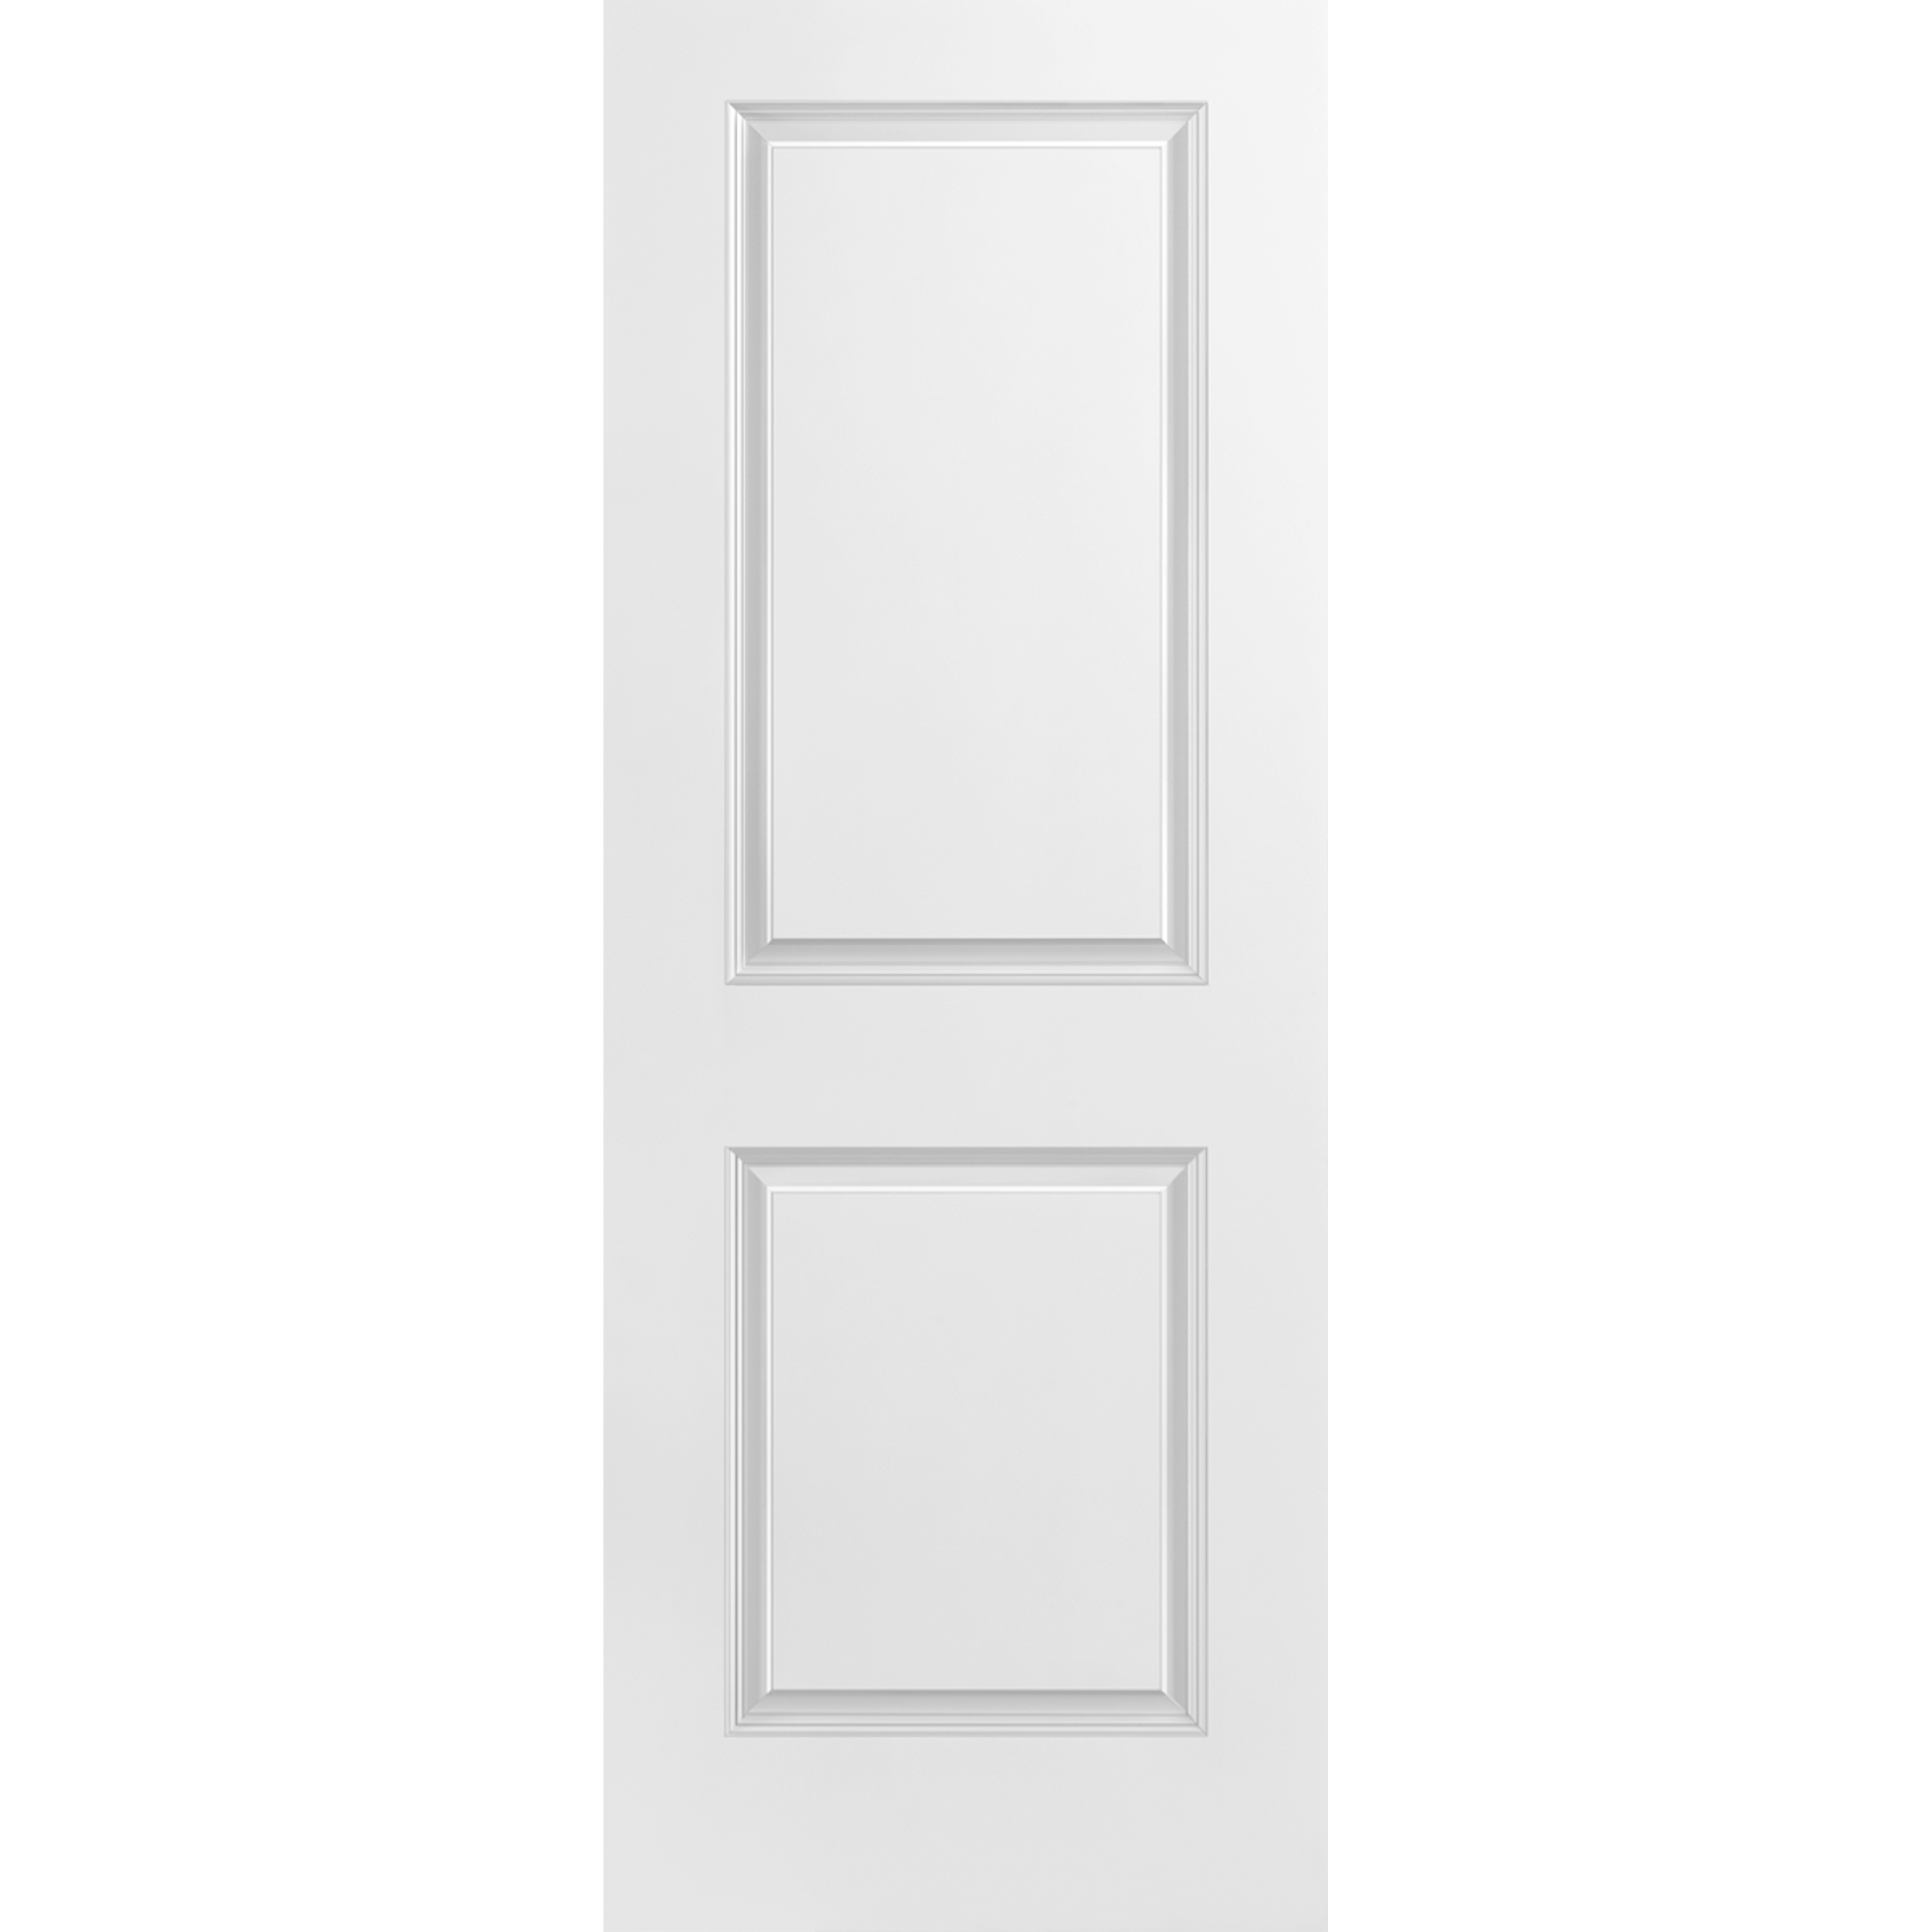 12x80 2 Panel Square Smooth Moulded Panel Door Hollow Core